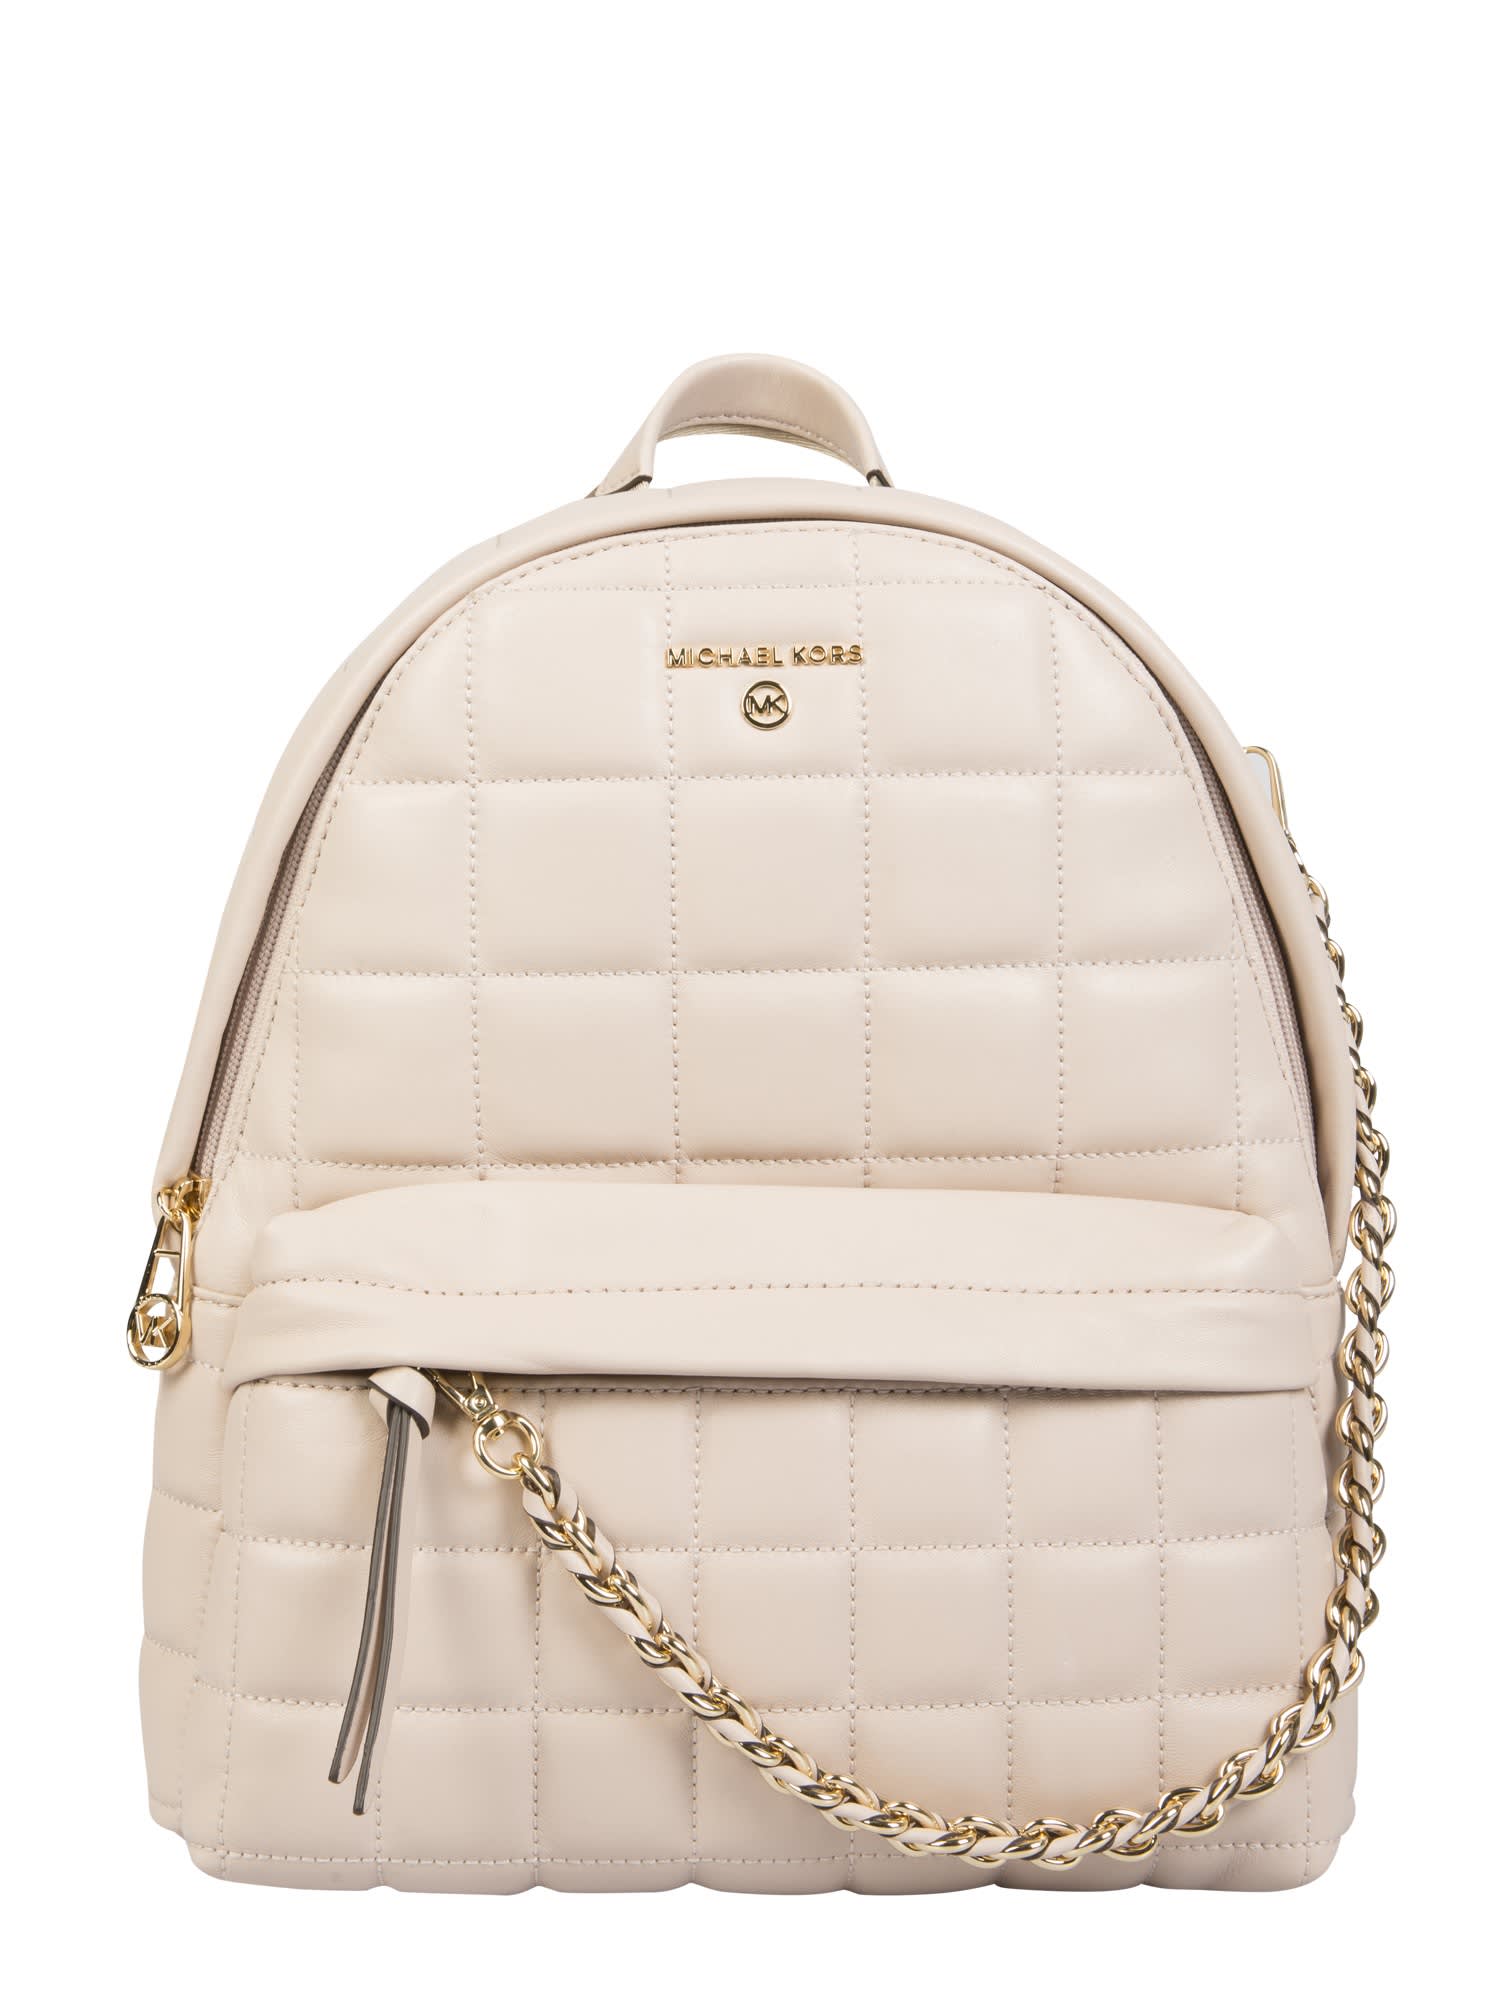 michael kors backpack with side pockets